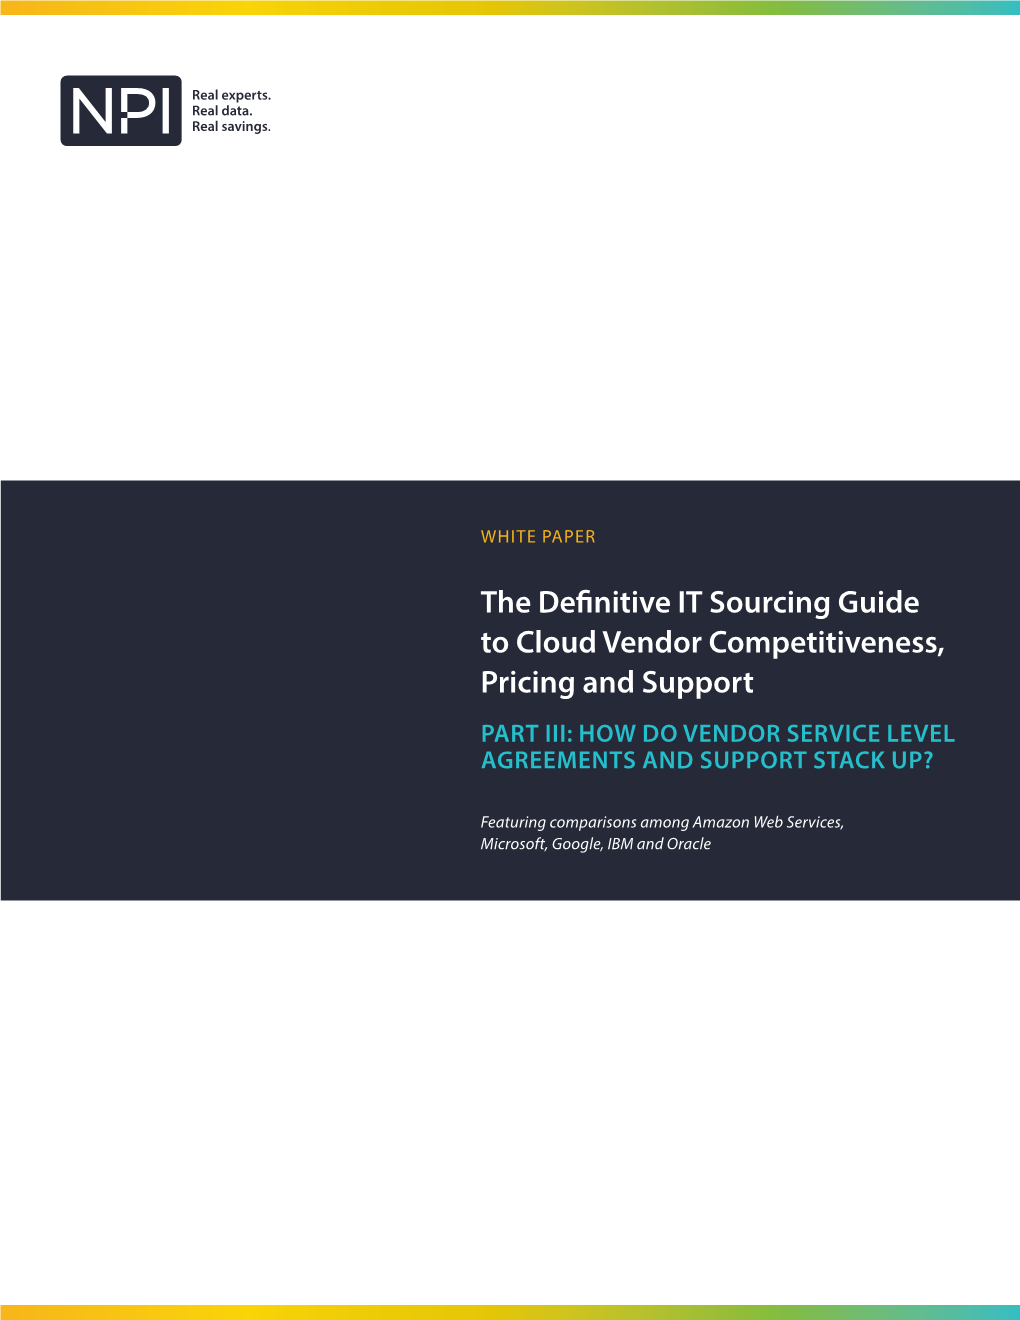 The Definitive IT Sourcing Guide to Cloud Vendor Competitiveness, Pricing and Support Part III: HOW DO VENDOR SERVICE LEVEL AGREEMENTS and SUPPORT STACK UP?